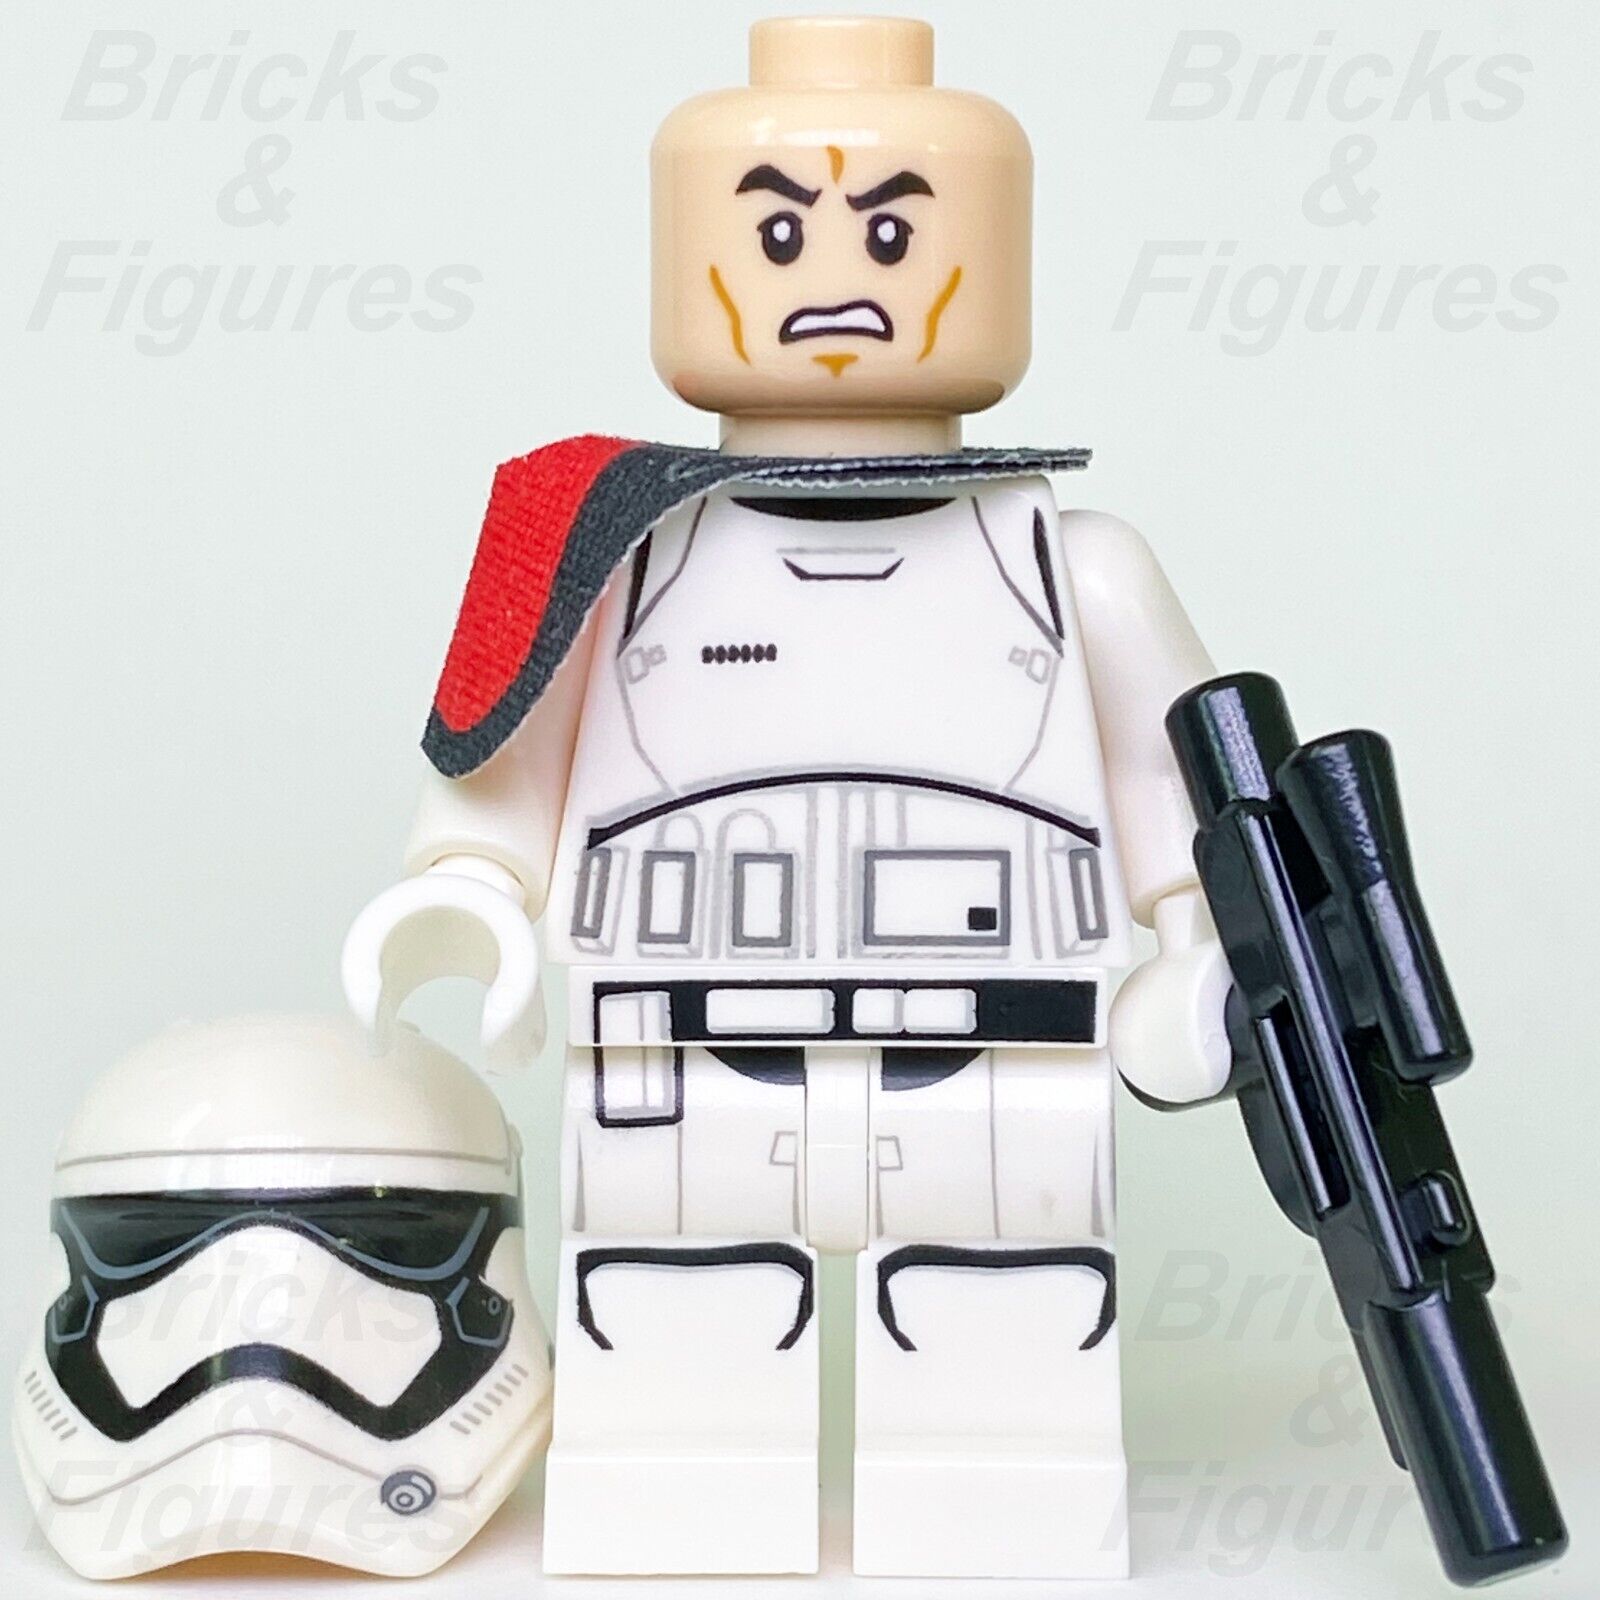 LEGO Star Wars First Order Stormtrooper Officer Minifigure 75104 sw0664 Minifig 2